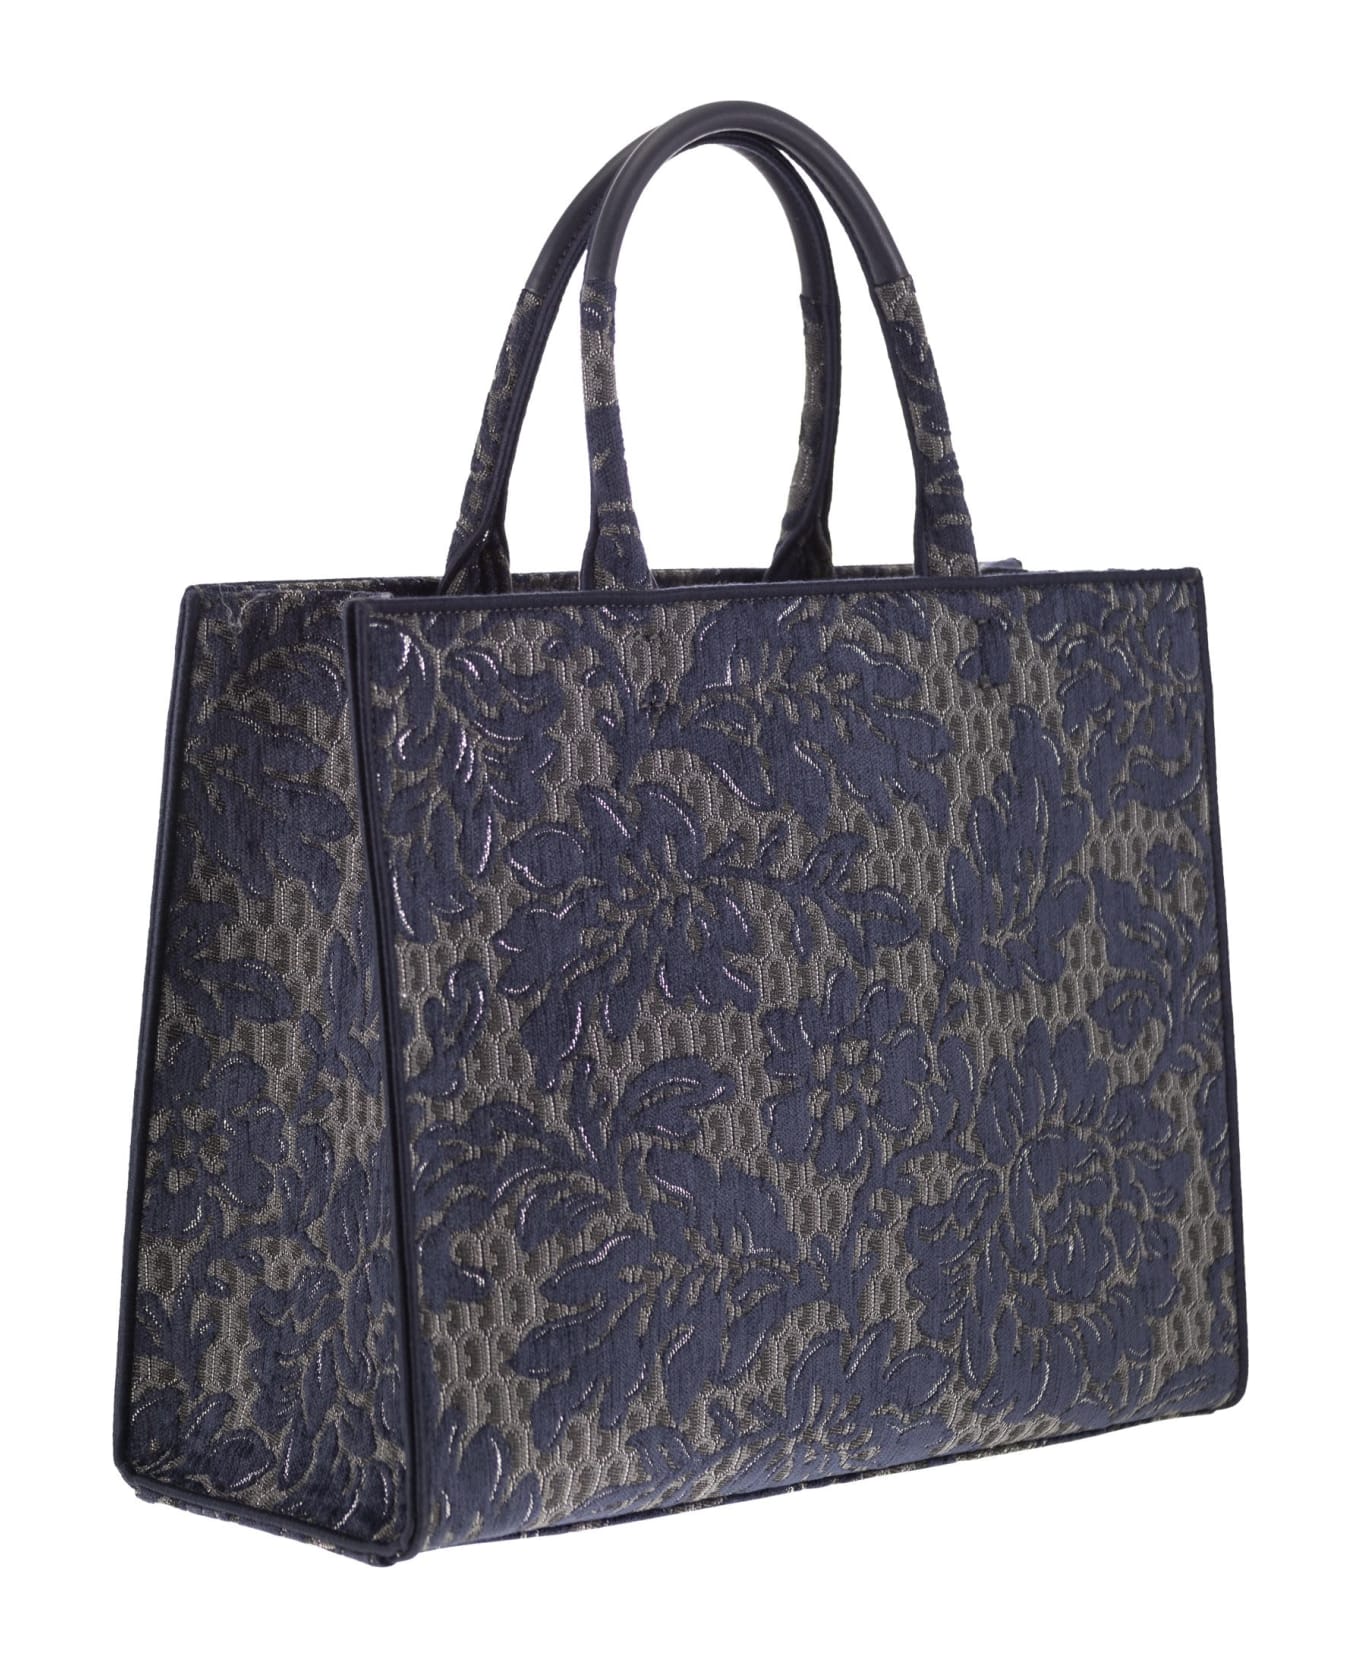 Furla Opportunity - Tote Bag - Blue トートバッグ